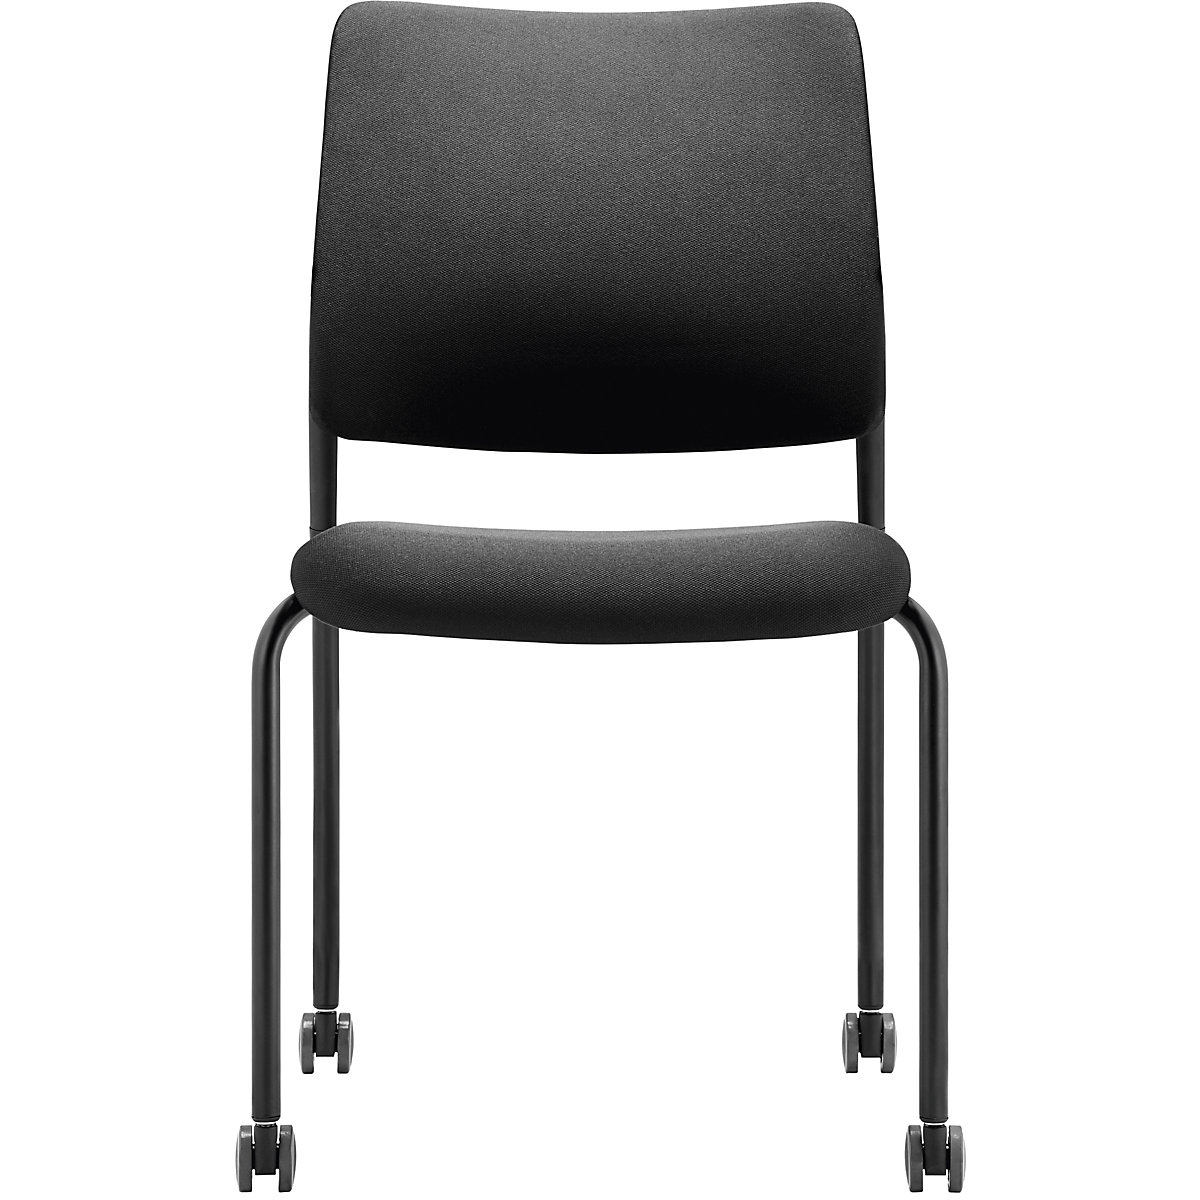 TO-SYNC meet meeting room chair – TrendOffice, with upholstered back rest, pack of 4, black, with castors-8